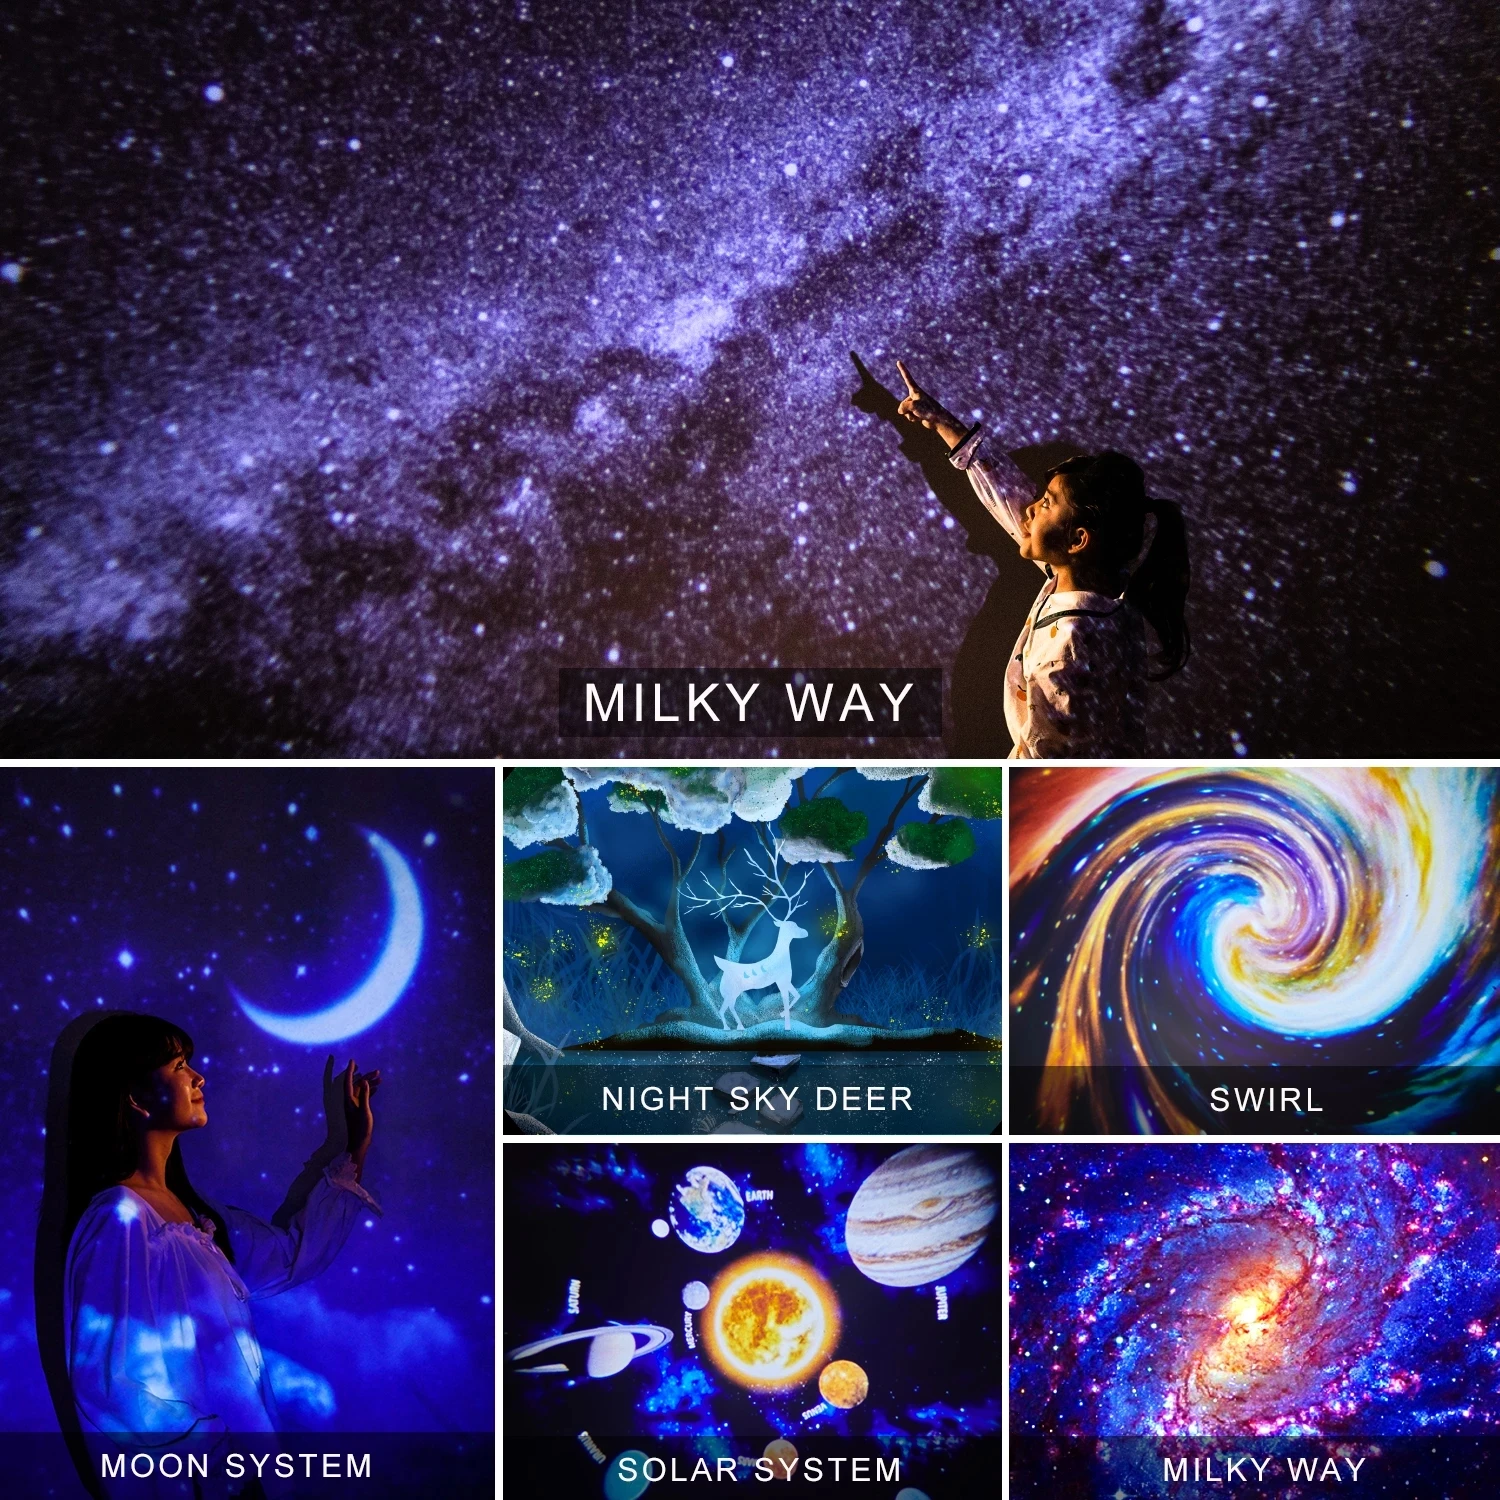 Planetarium Projector Galaxy Projector Star Projector 13 Sheets Of Film  Meet Fantasy of Starry Sky Extreme Romantic For Bedroom - AliExpress